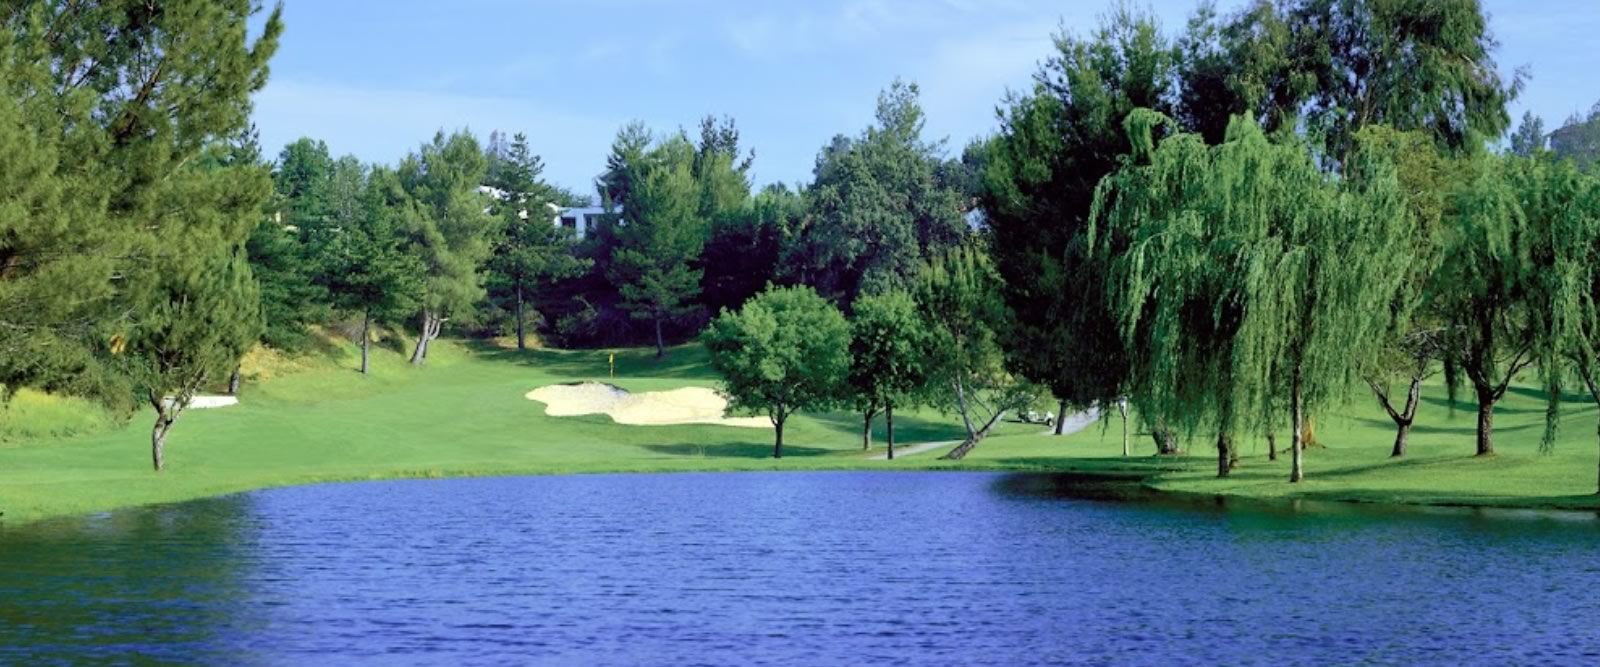 Golf Courses In Hollywood Ca